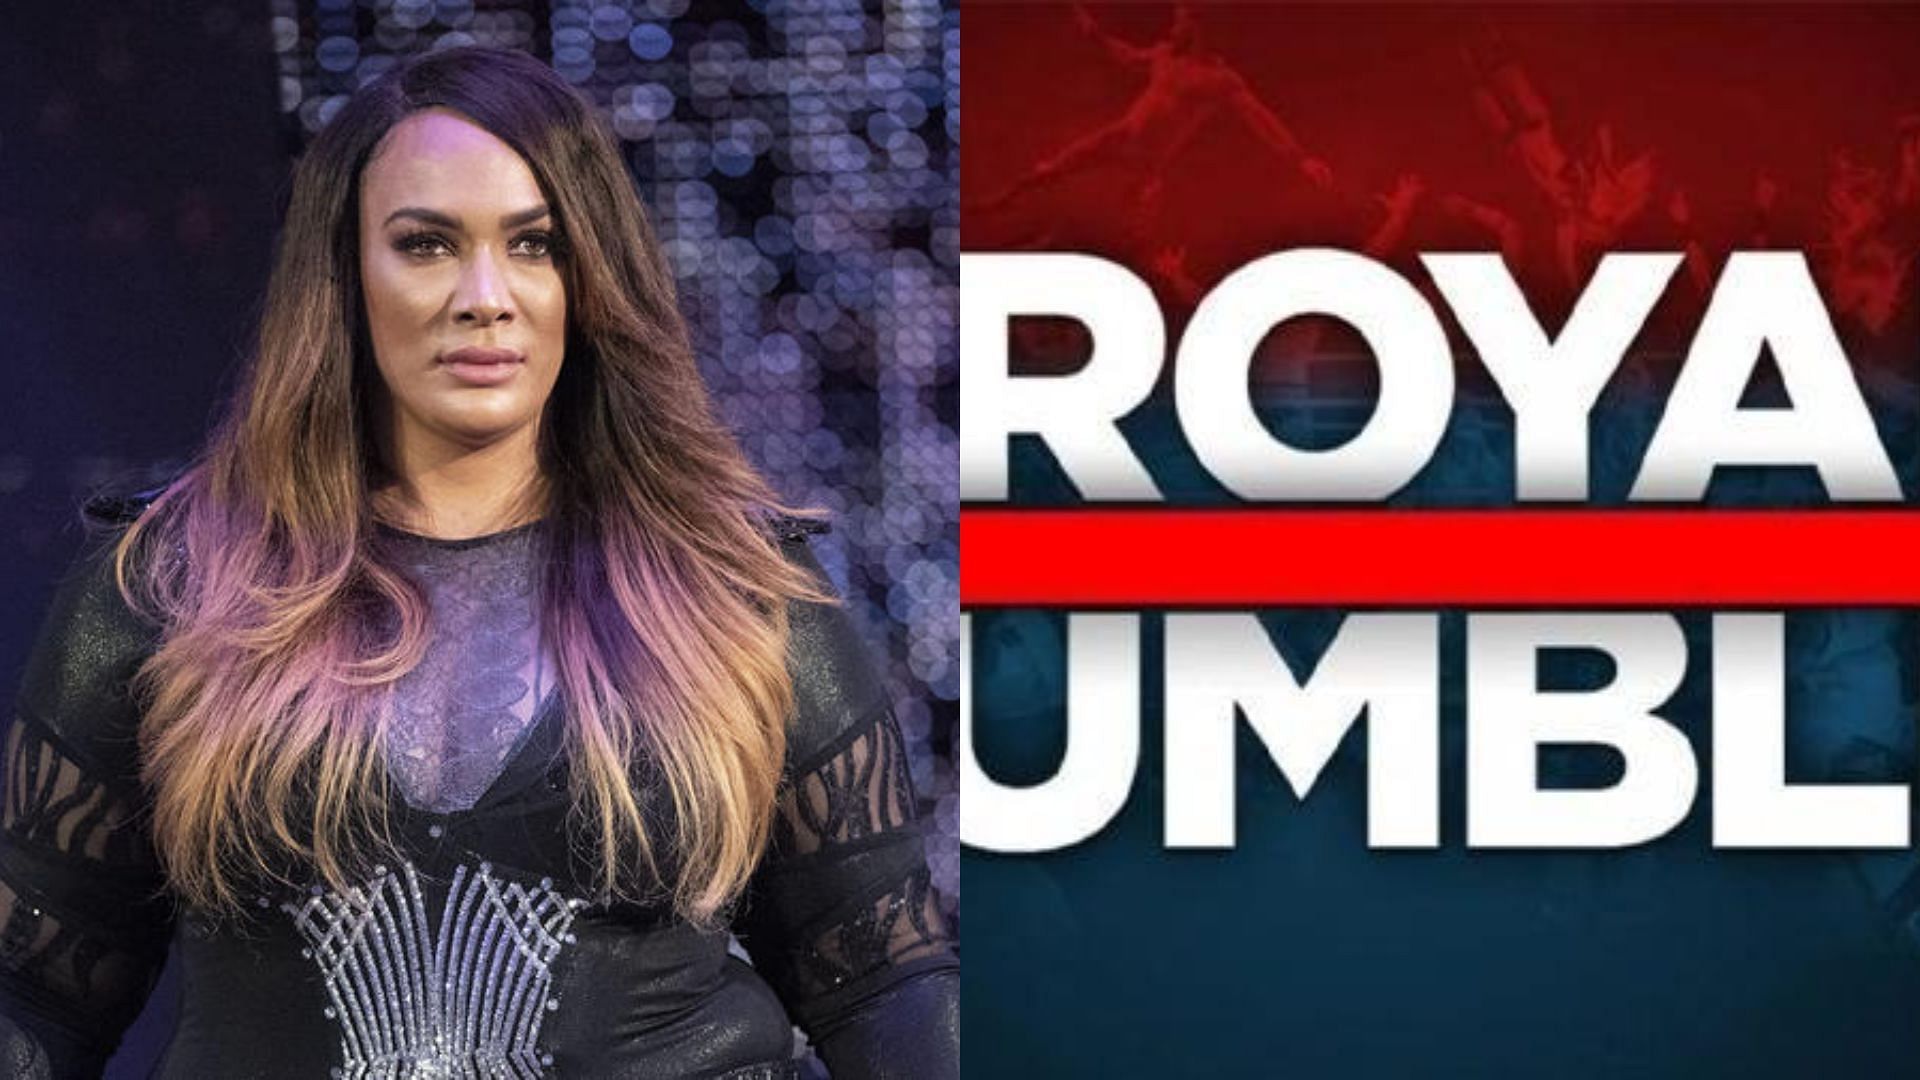 Nia Jax made her return to WWE after being released